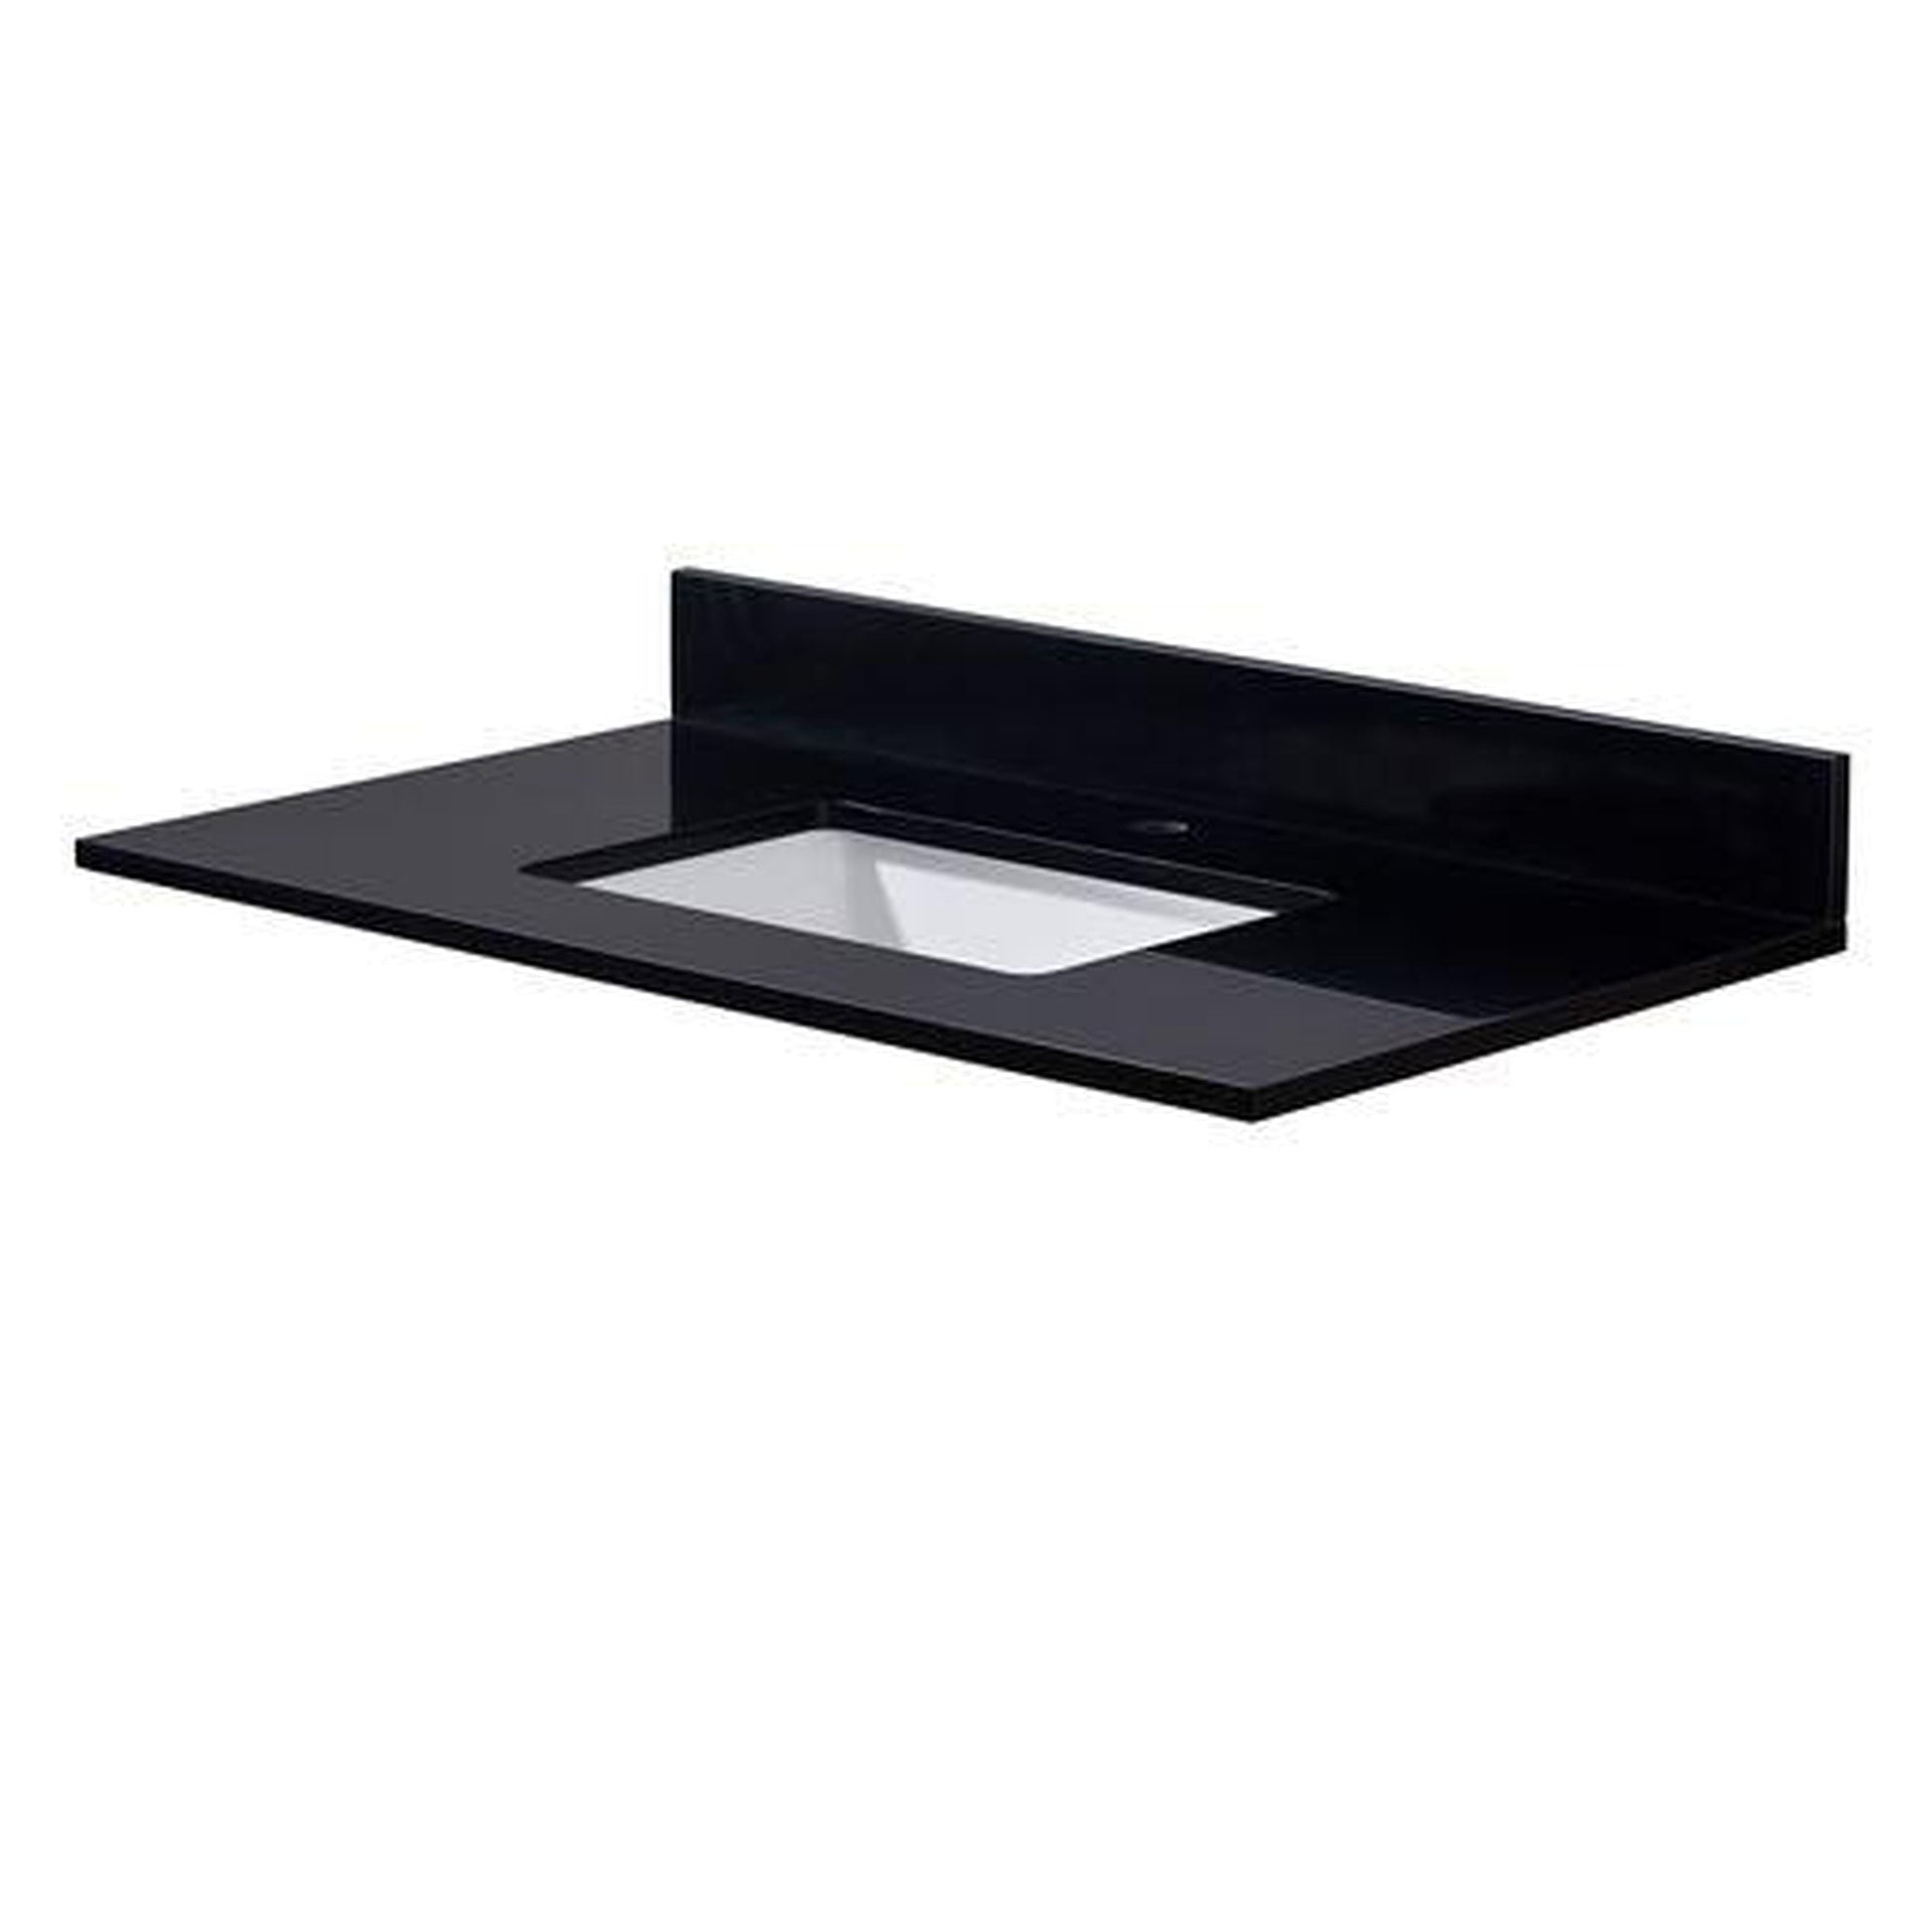 Altair Feltre 37" x 22" Imperial Black Composite Stone Bathroom Vanity Top With White SInk